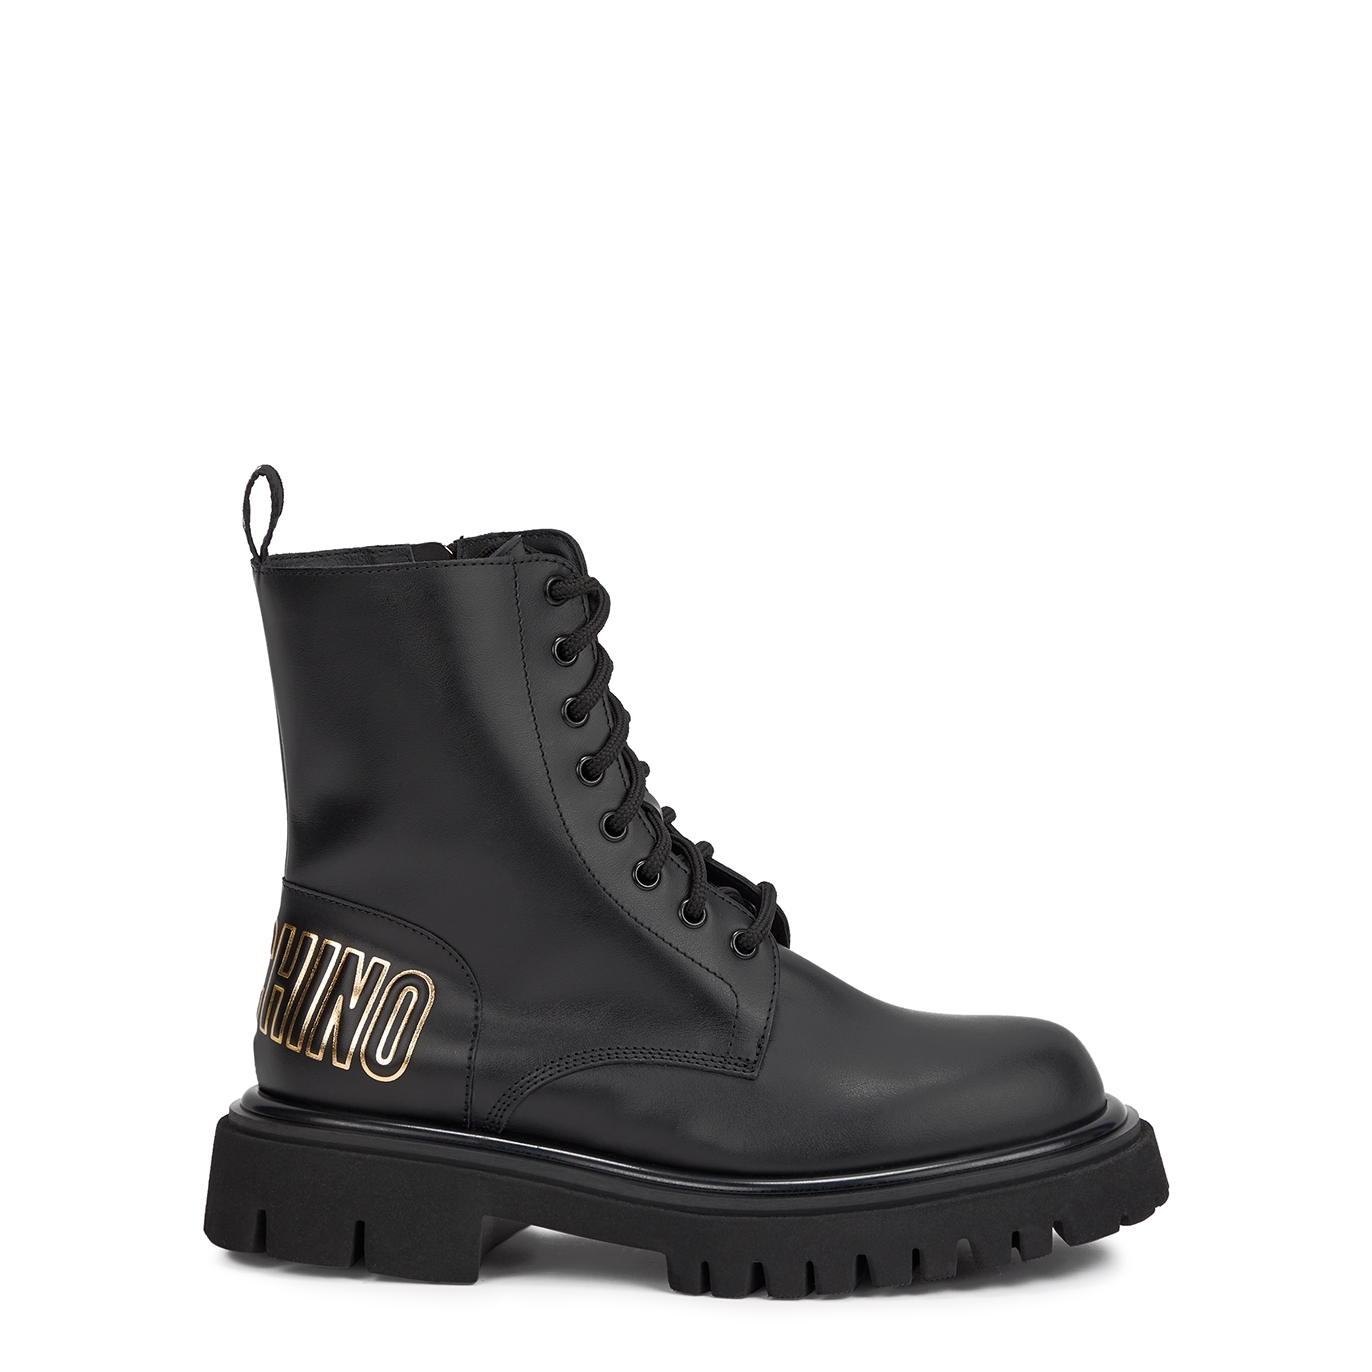 Moschino Logo Leather Ankle Boots - Black - 7